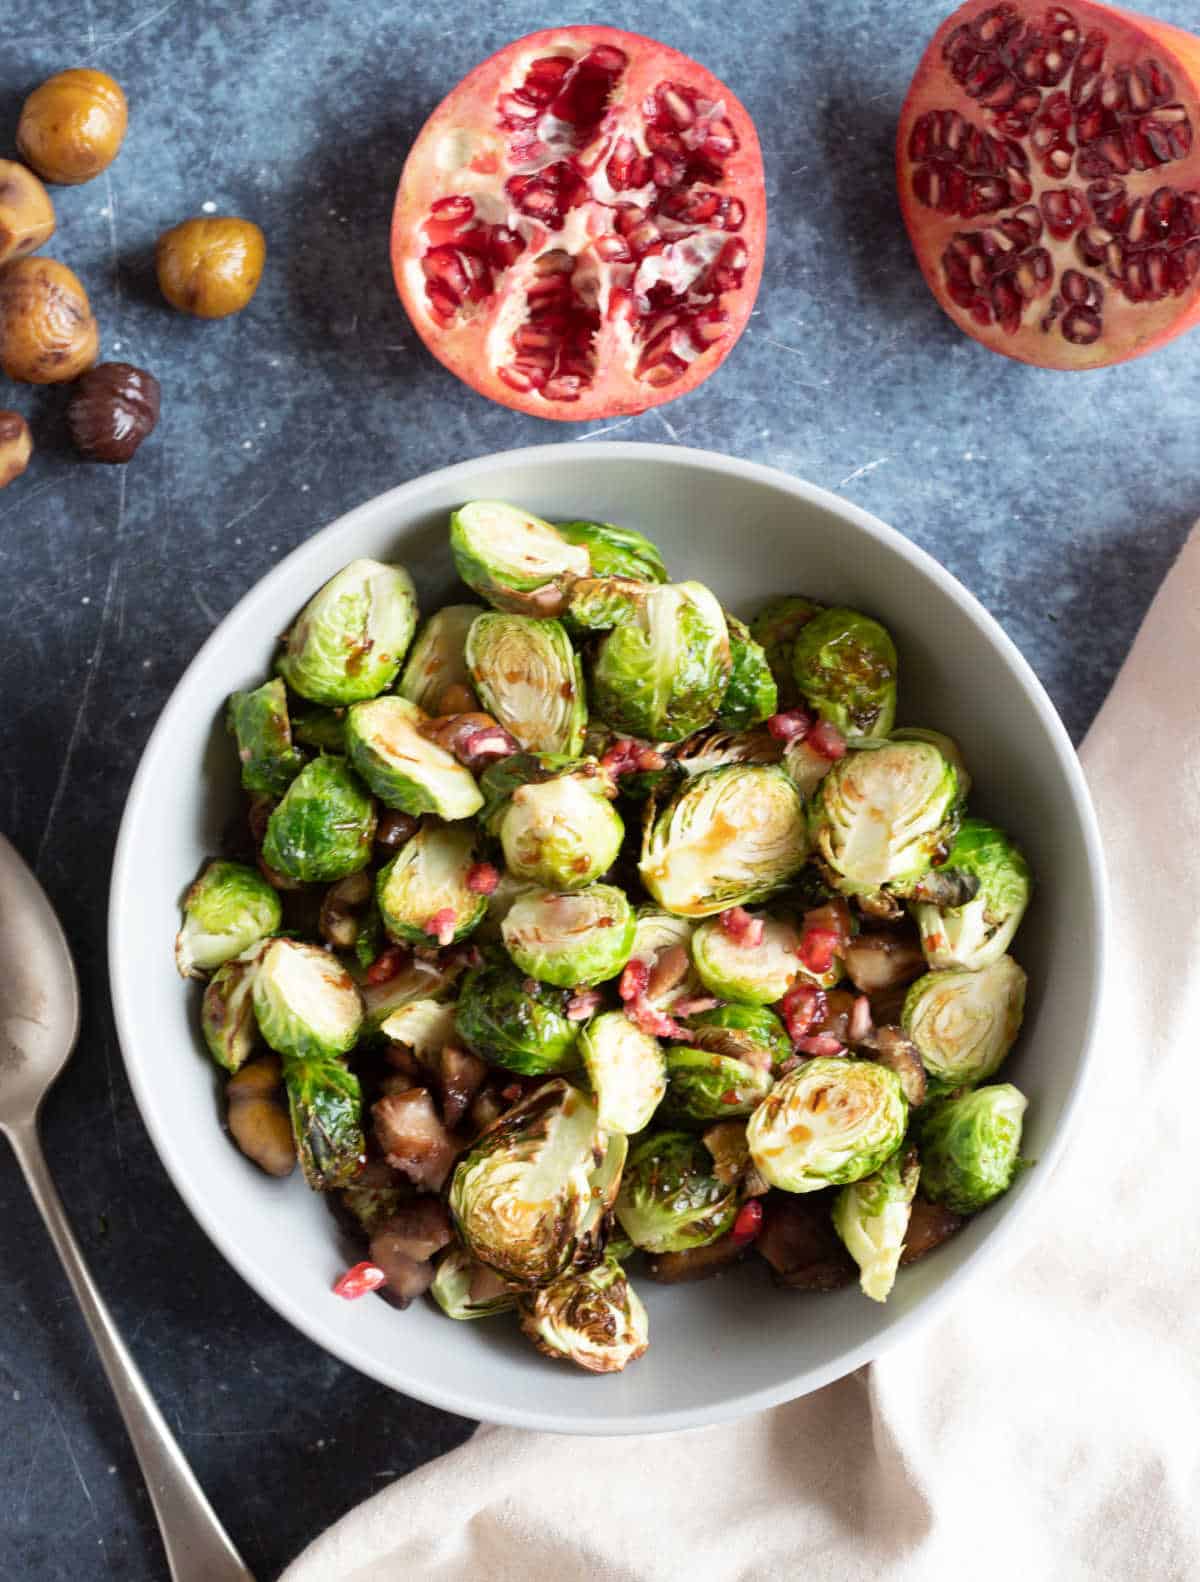 Crispy air fryer Brussel sprouts in a bowl.